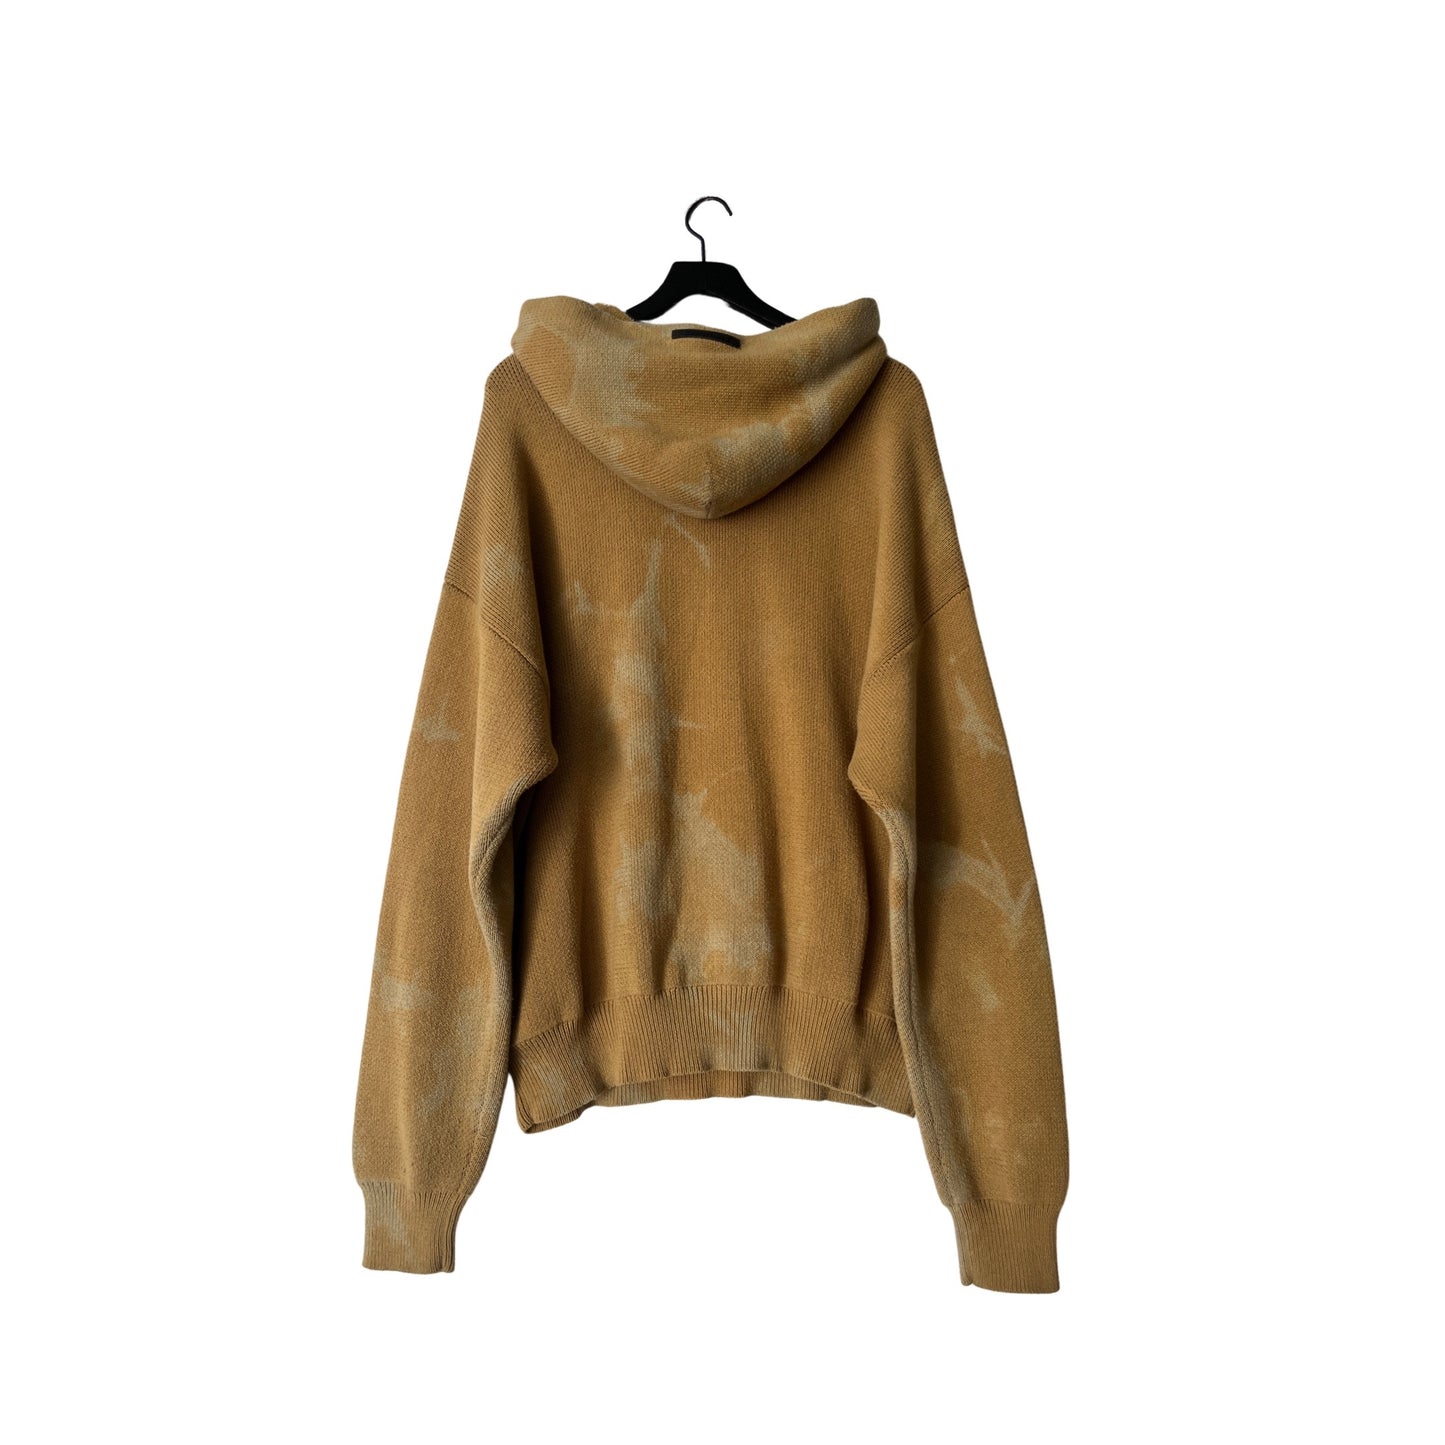 Fear of God ESSENTIALS Heavyweight Knit Hoodie in Tumbleweed / LARGE